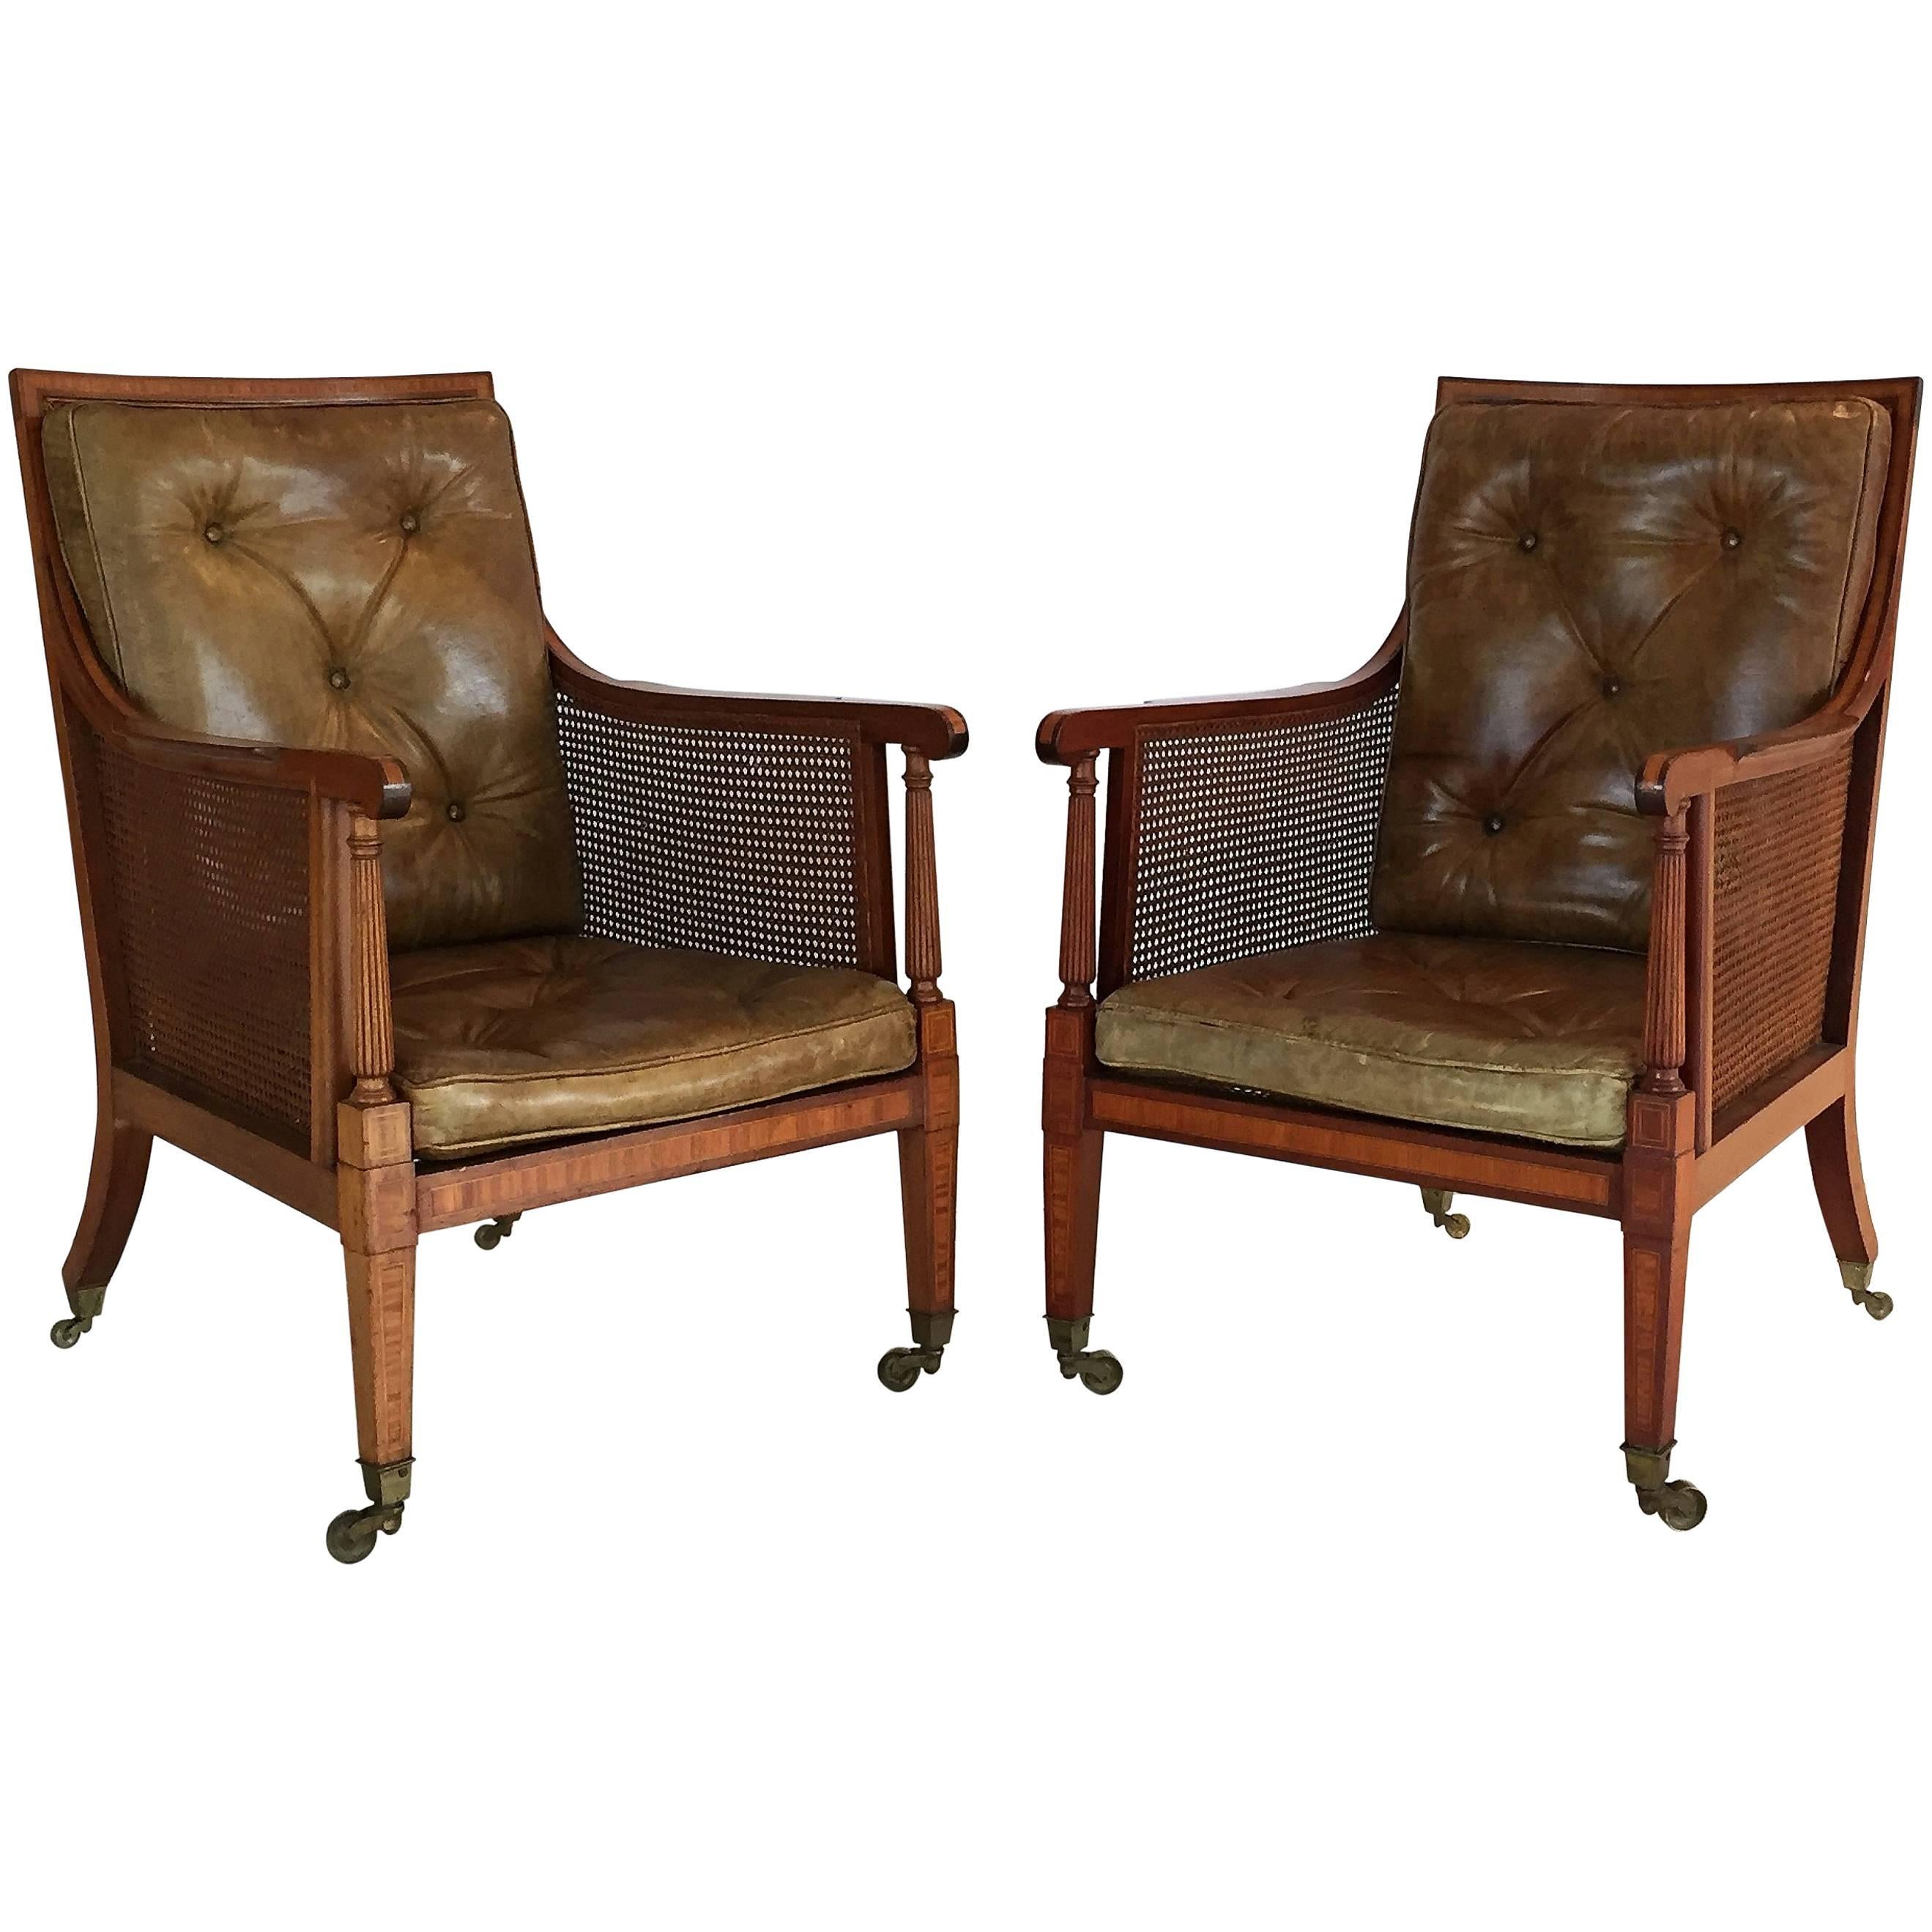 Pair of English Caned Library Bergere Chairs